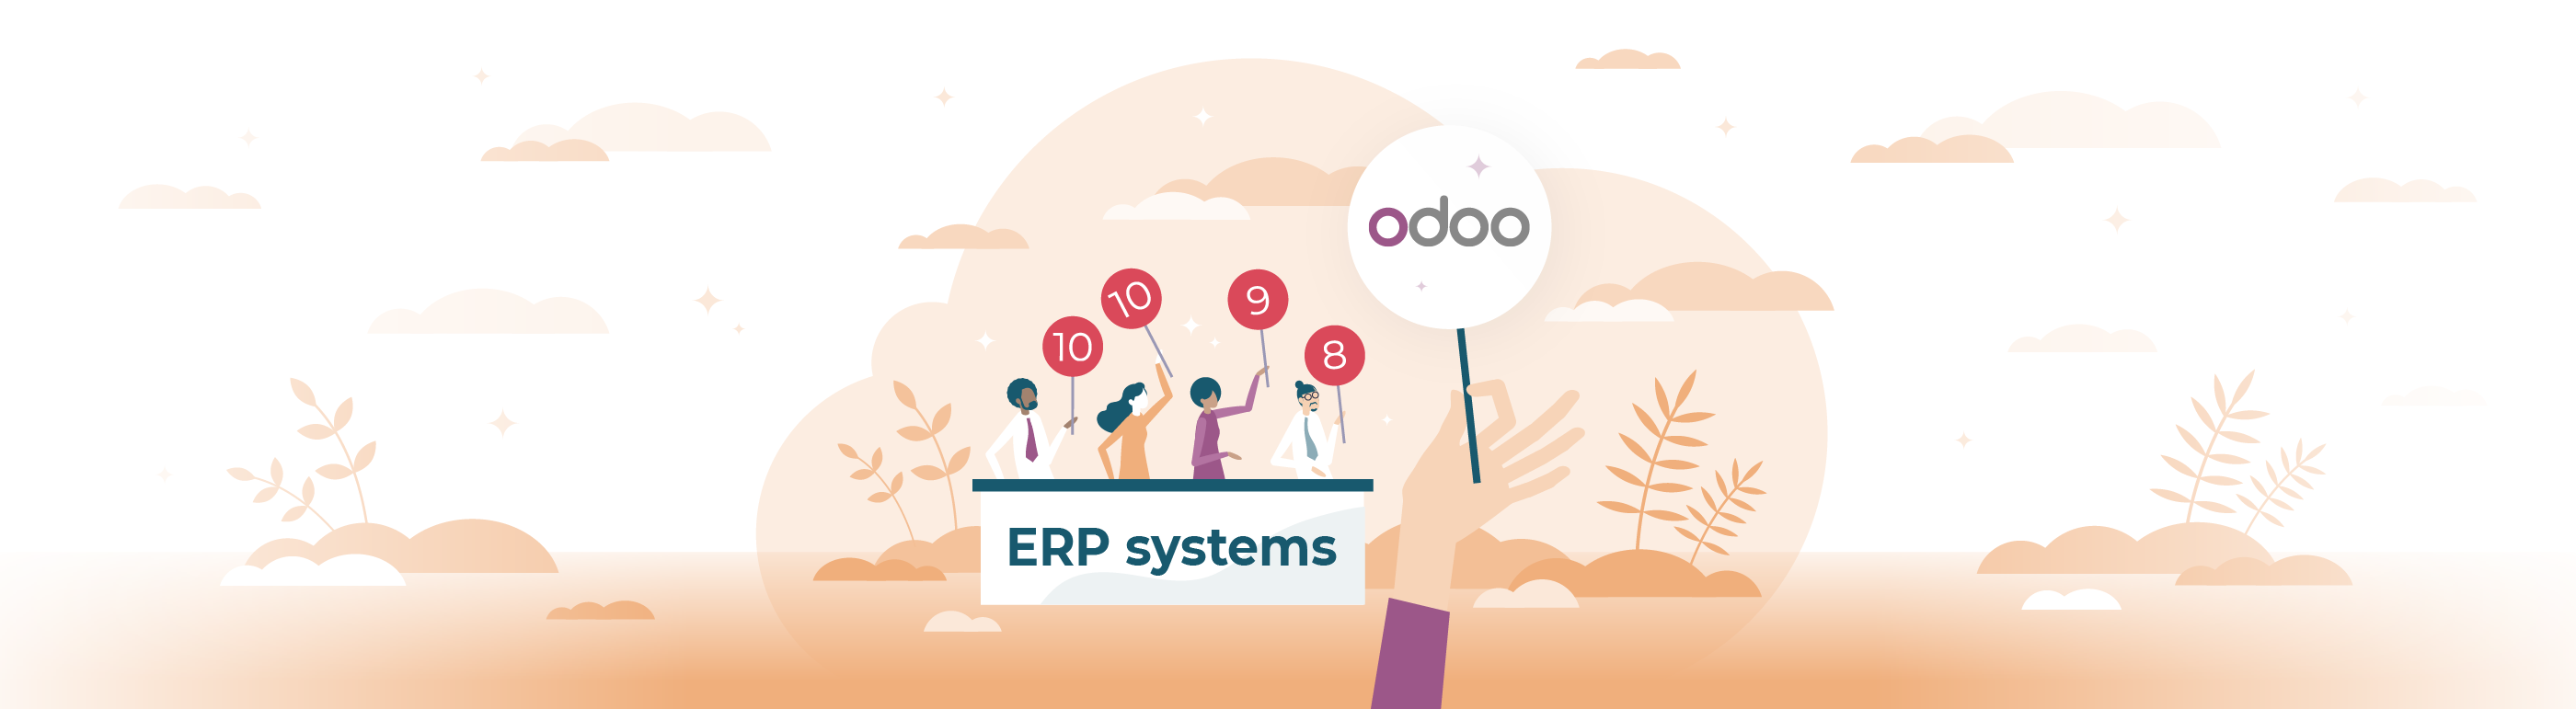 Our Guide to Choosing the Right ERP: Important questions to Ask